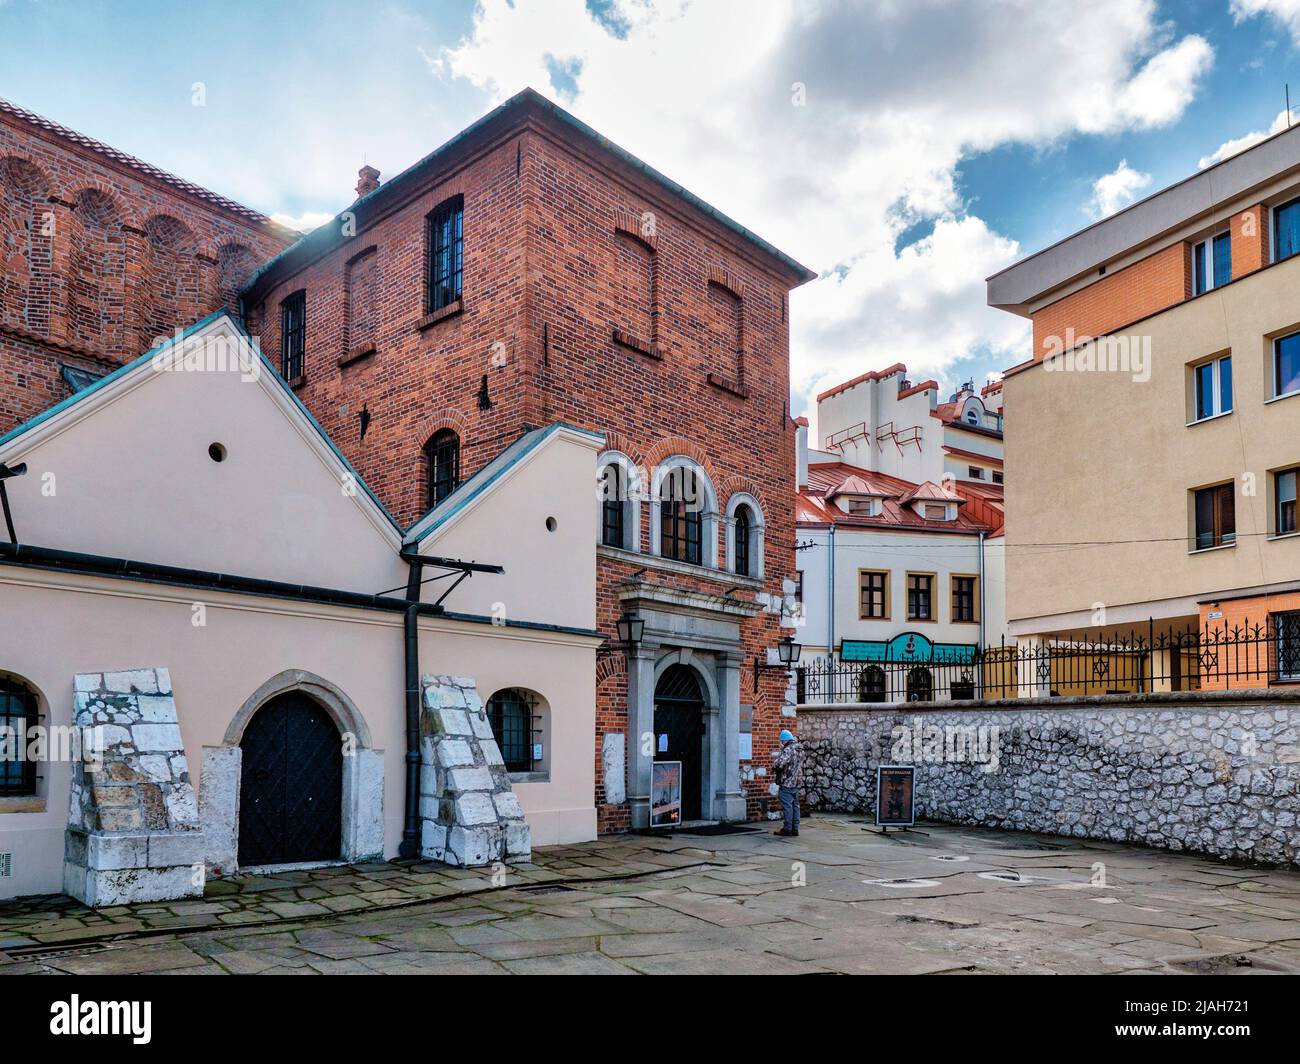 The Old Synagogue - a synagogue located in Kazimierz, Krakow, at 24 Szeroka Street. It is one of the oldest preserved synagogues in Poland. Stock Photo